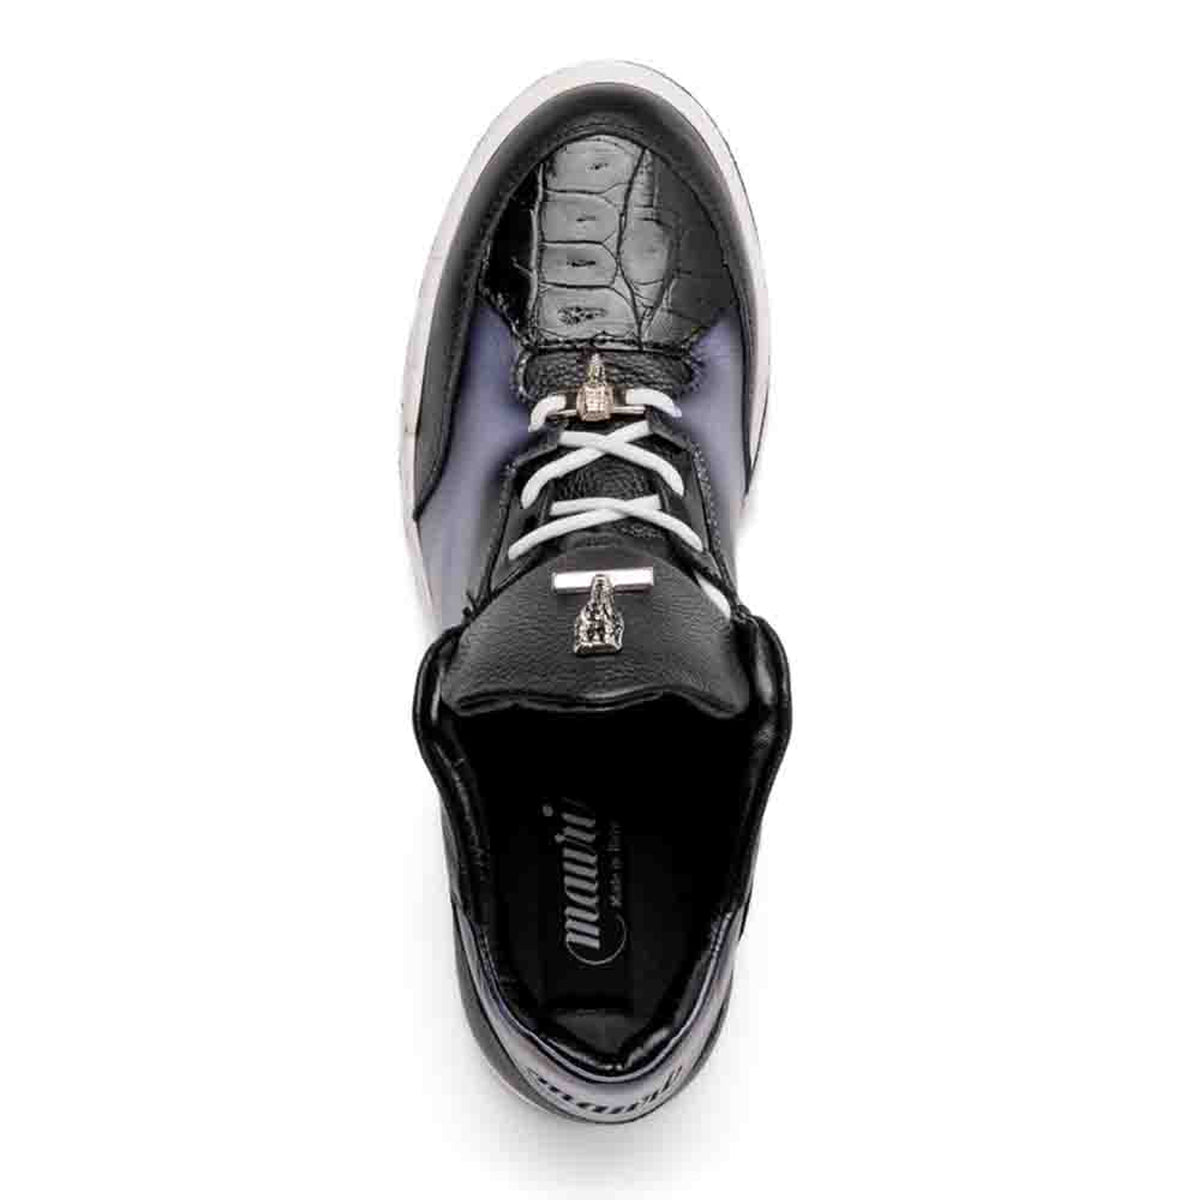 Mauri 8423 Ghost Black/White Dirty Black Baby Crocodile & Nappa Sneakers - Dudes Boutique